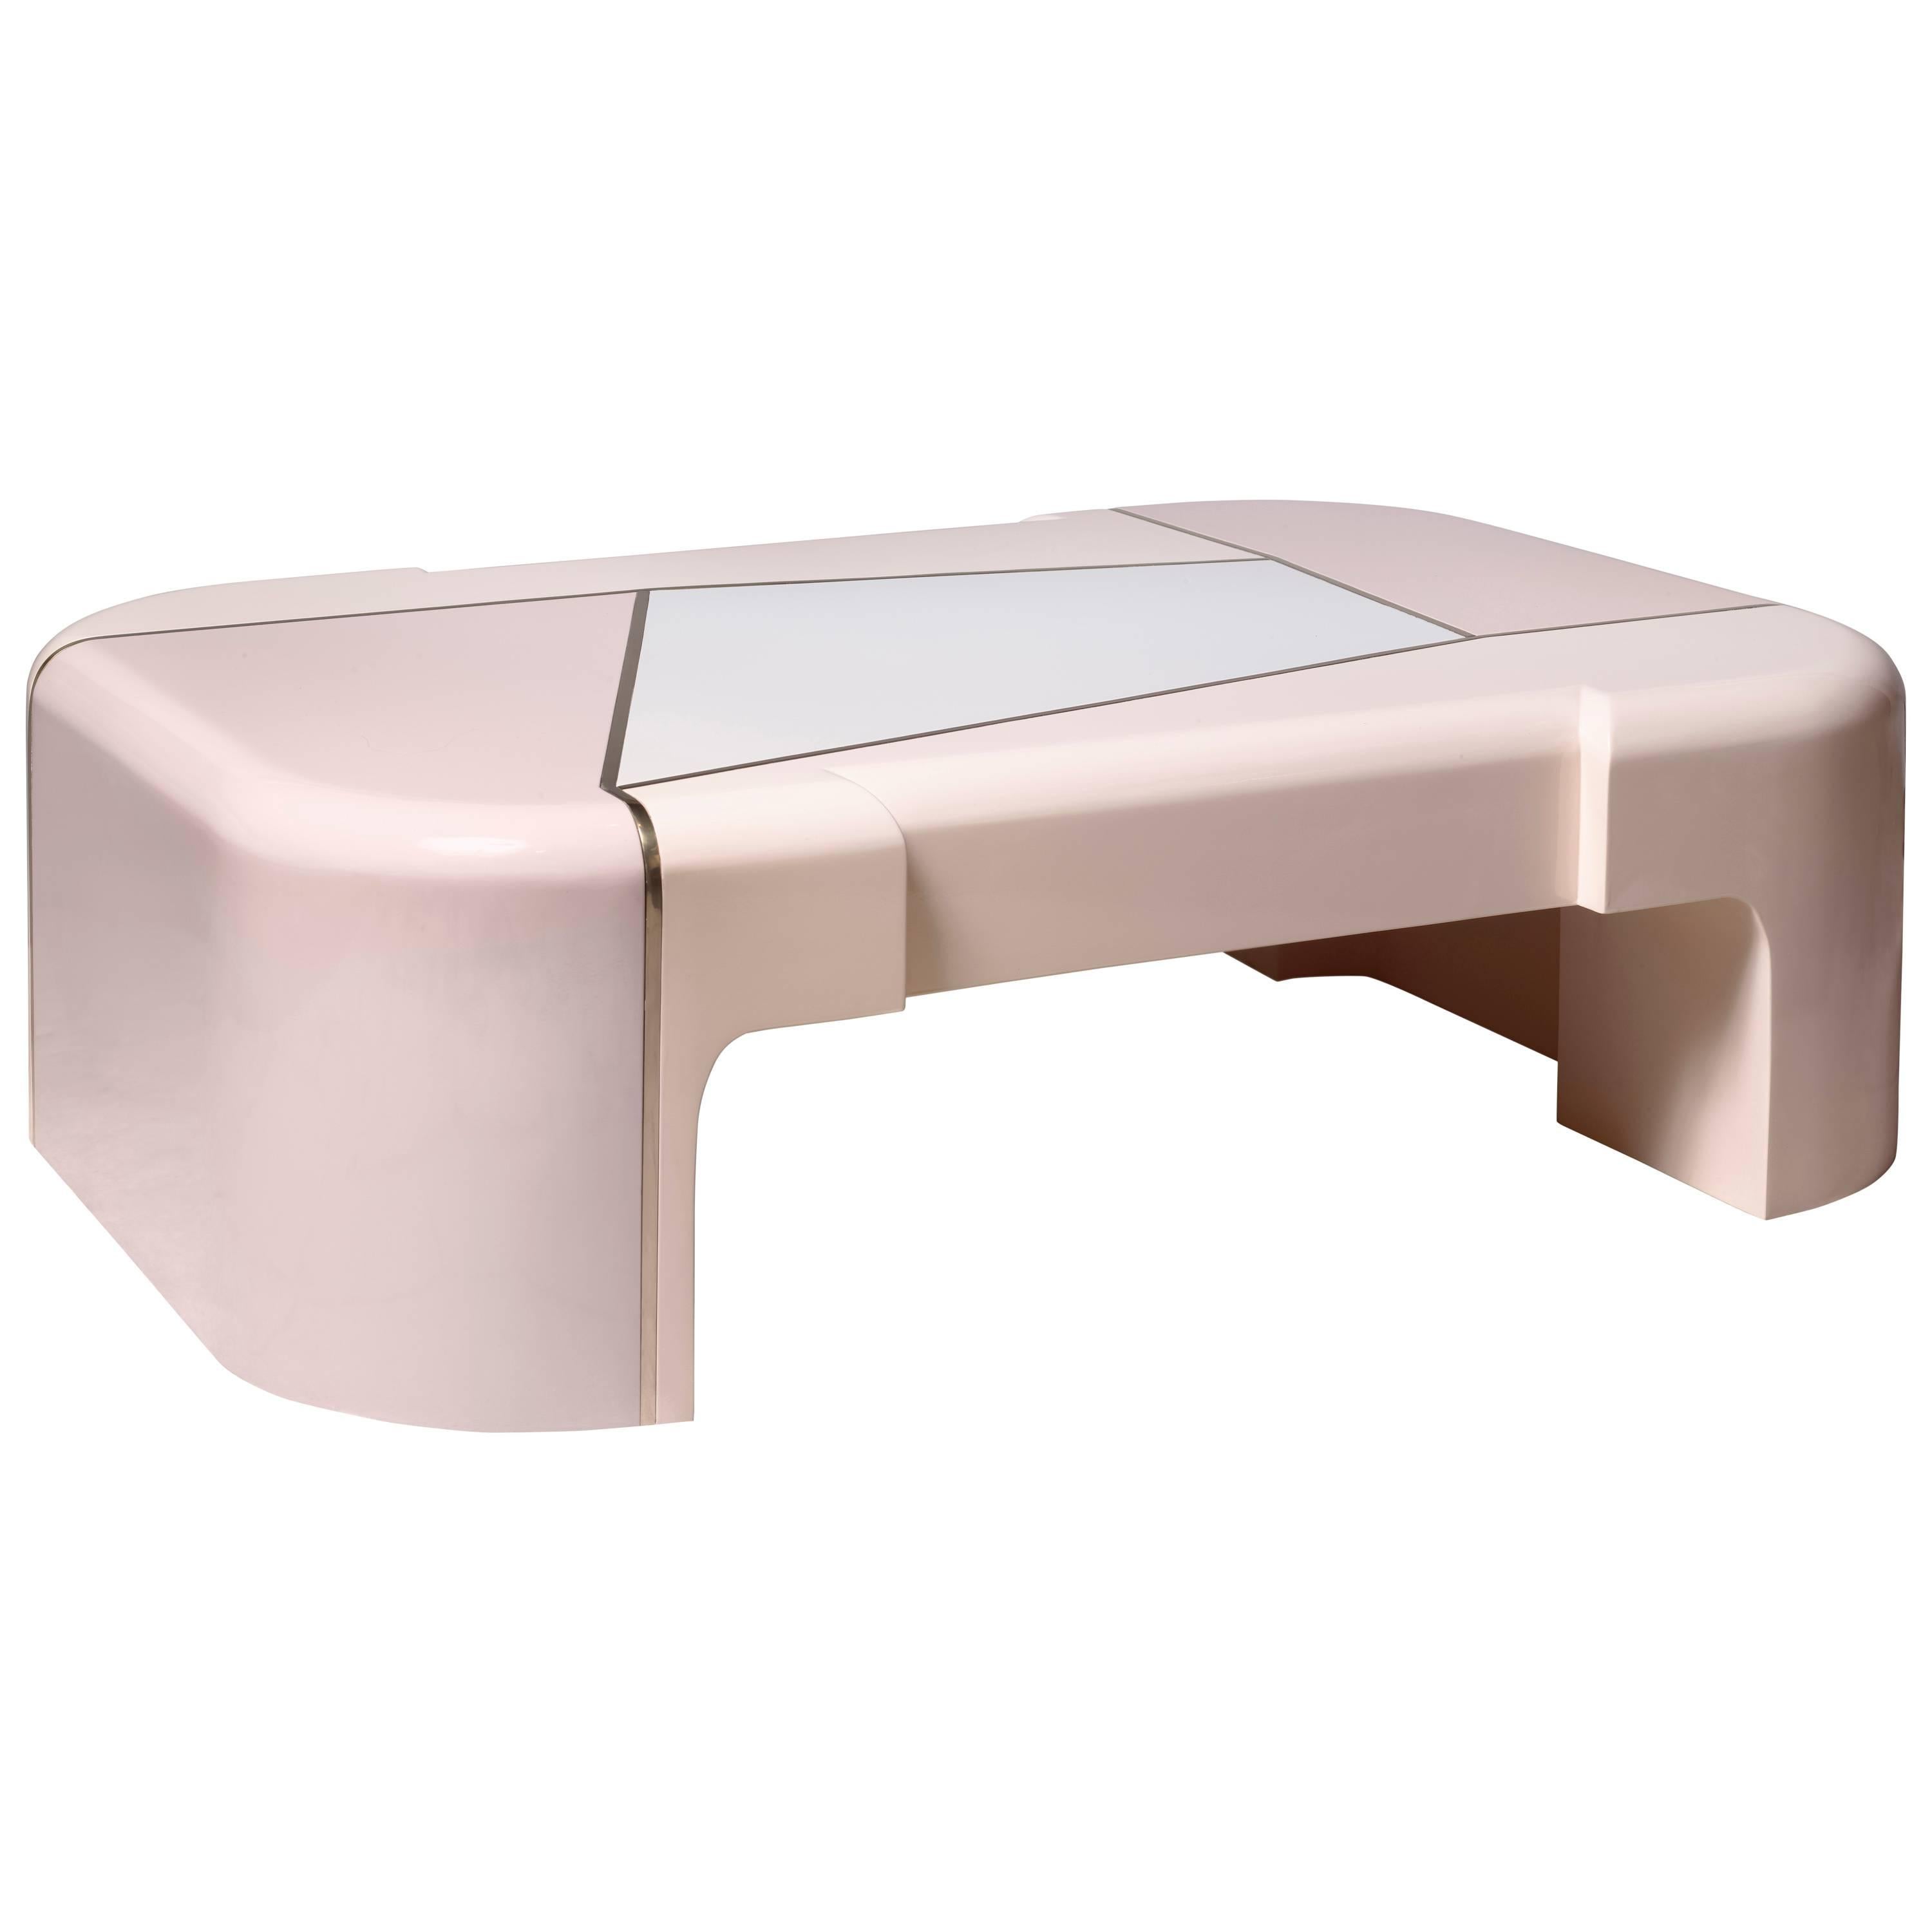 Pinkk Coffee Table For Sale